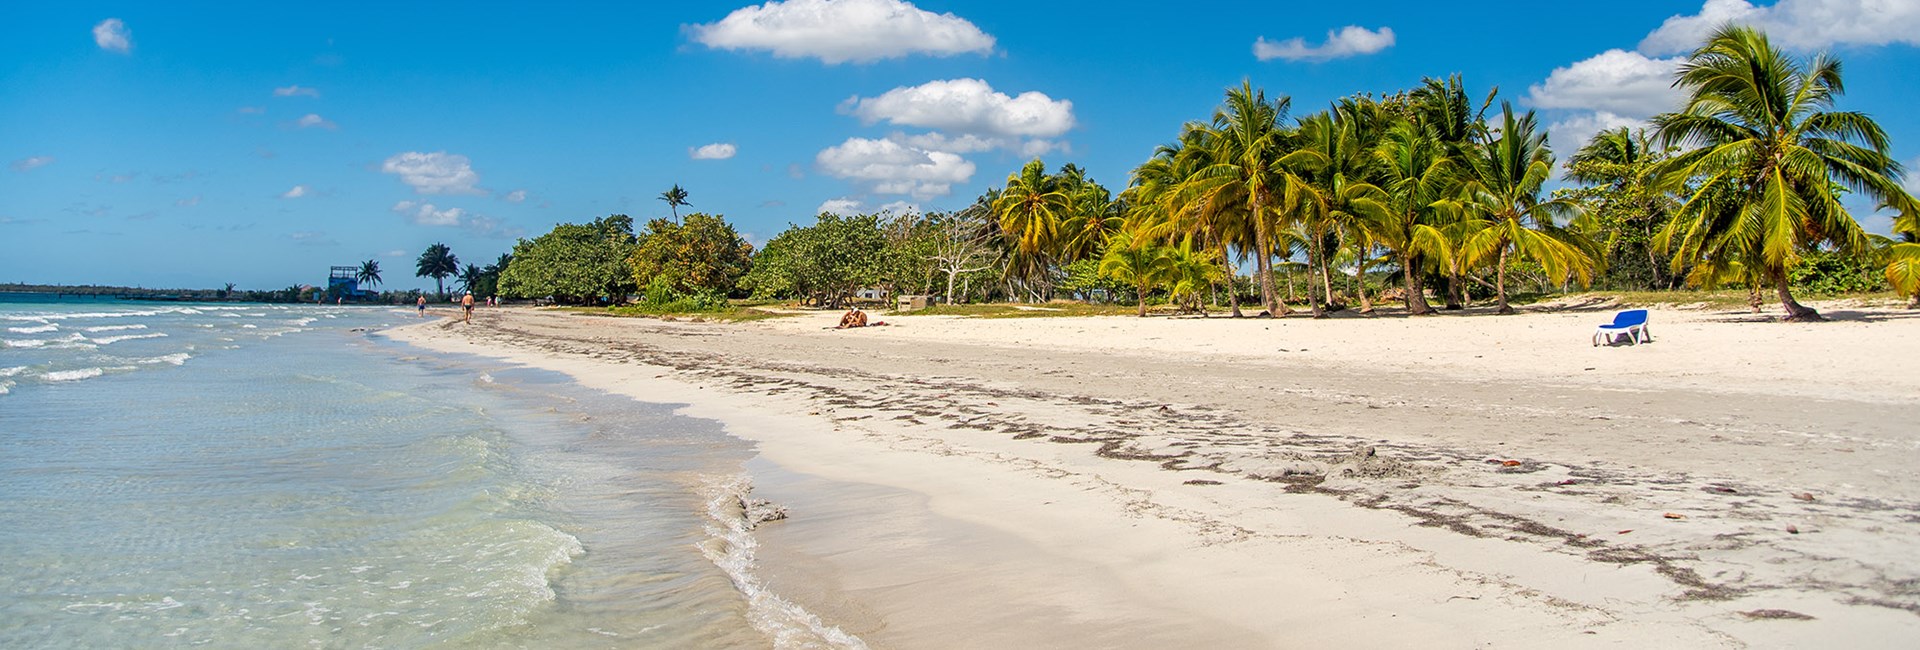 Natural tropical white sand beach lined with a forest of palm trees